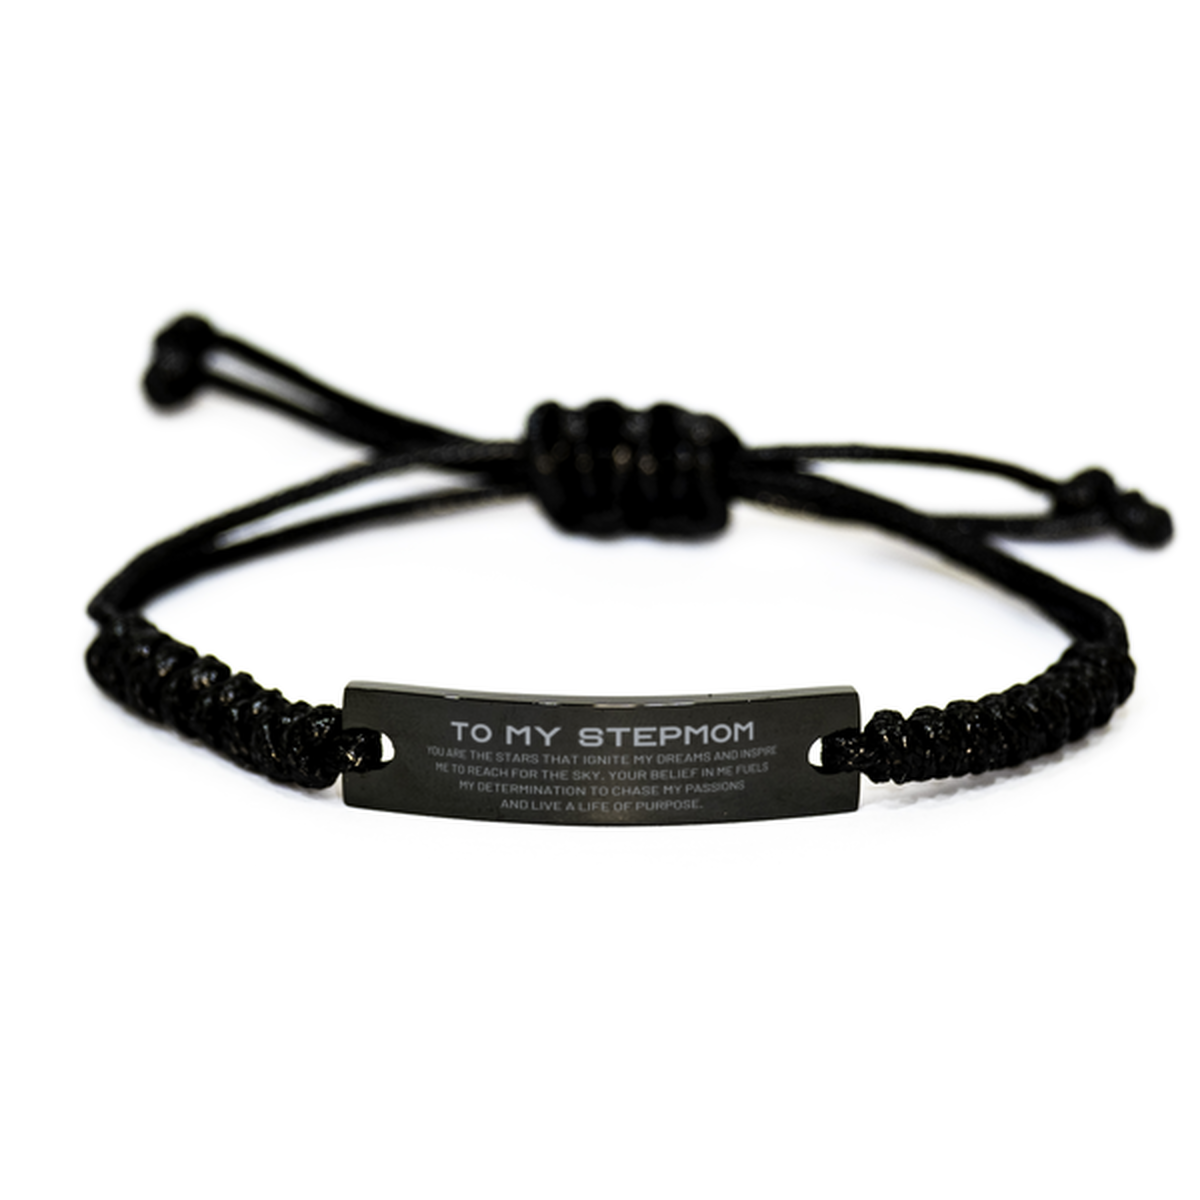 To My Stepmom Black Rope Bracelet, You are the stars that ignite my dreams and inspire me to reach for the sky, Birthday Unique Gifts For Stepmom, Thank You Gifts For Stepmom